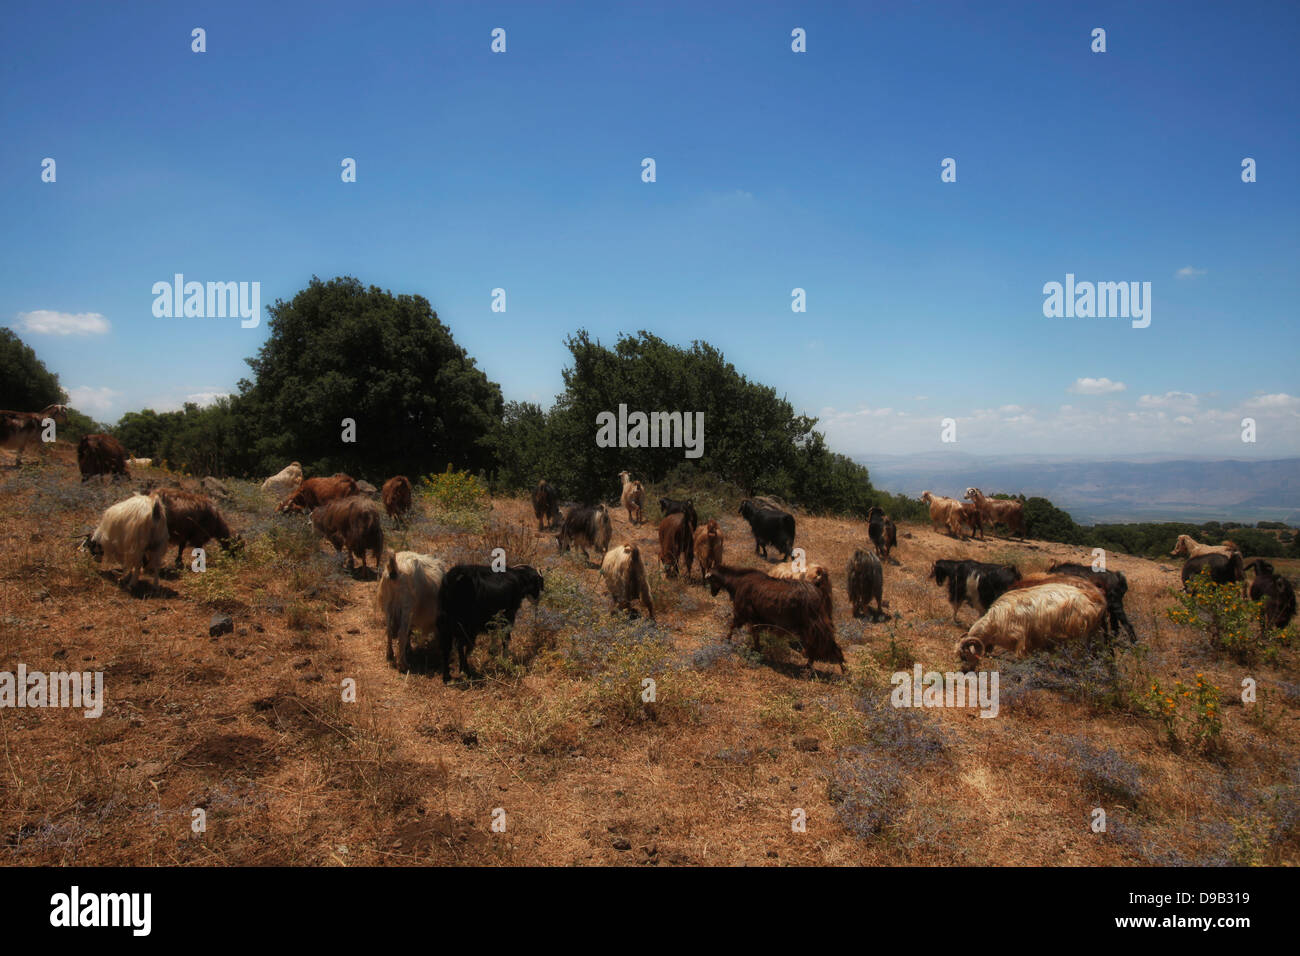 Goats herding in the hills near the Syrian border in the Golan Heights northern Israel Stock Photo